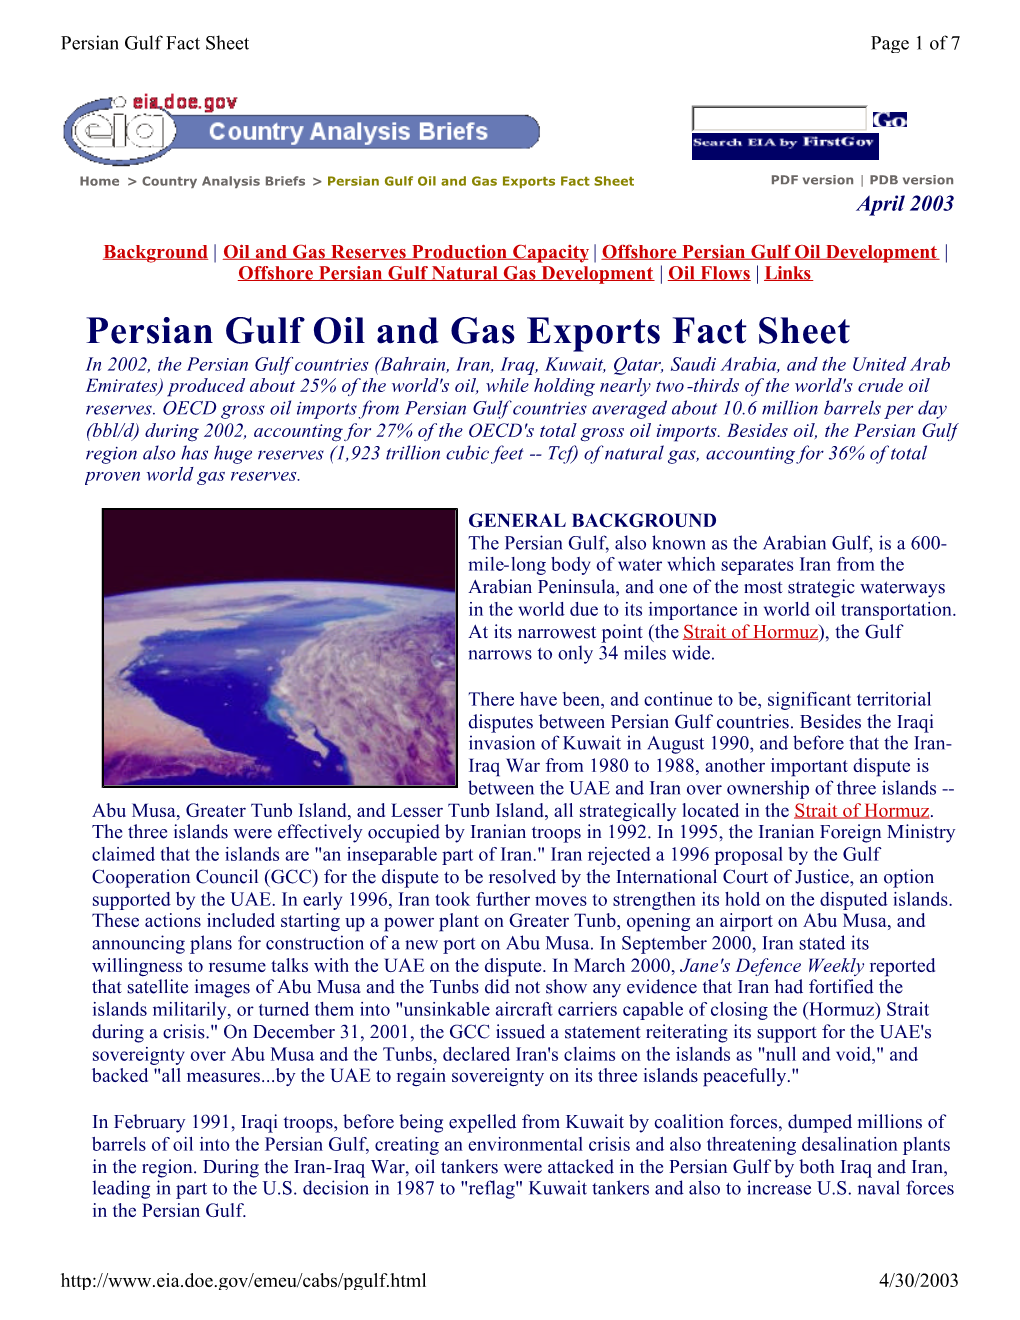 Persian Gulf Oil and Gas Exports Fact Sheet PDF Version | PDB Version April 2003